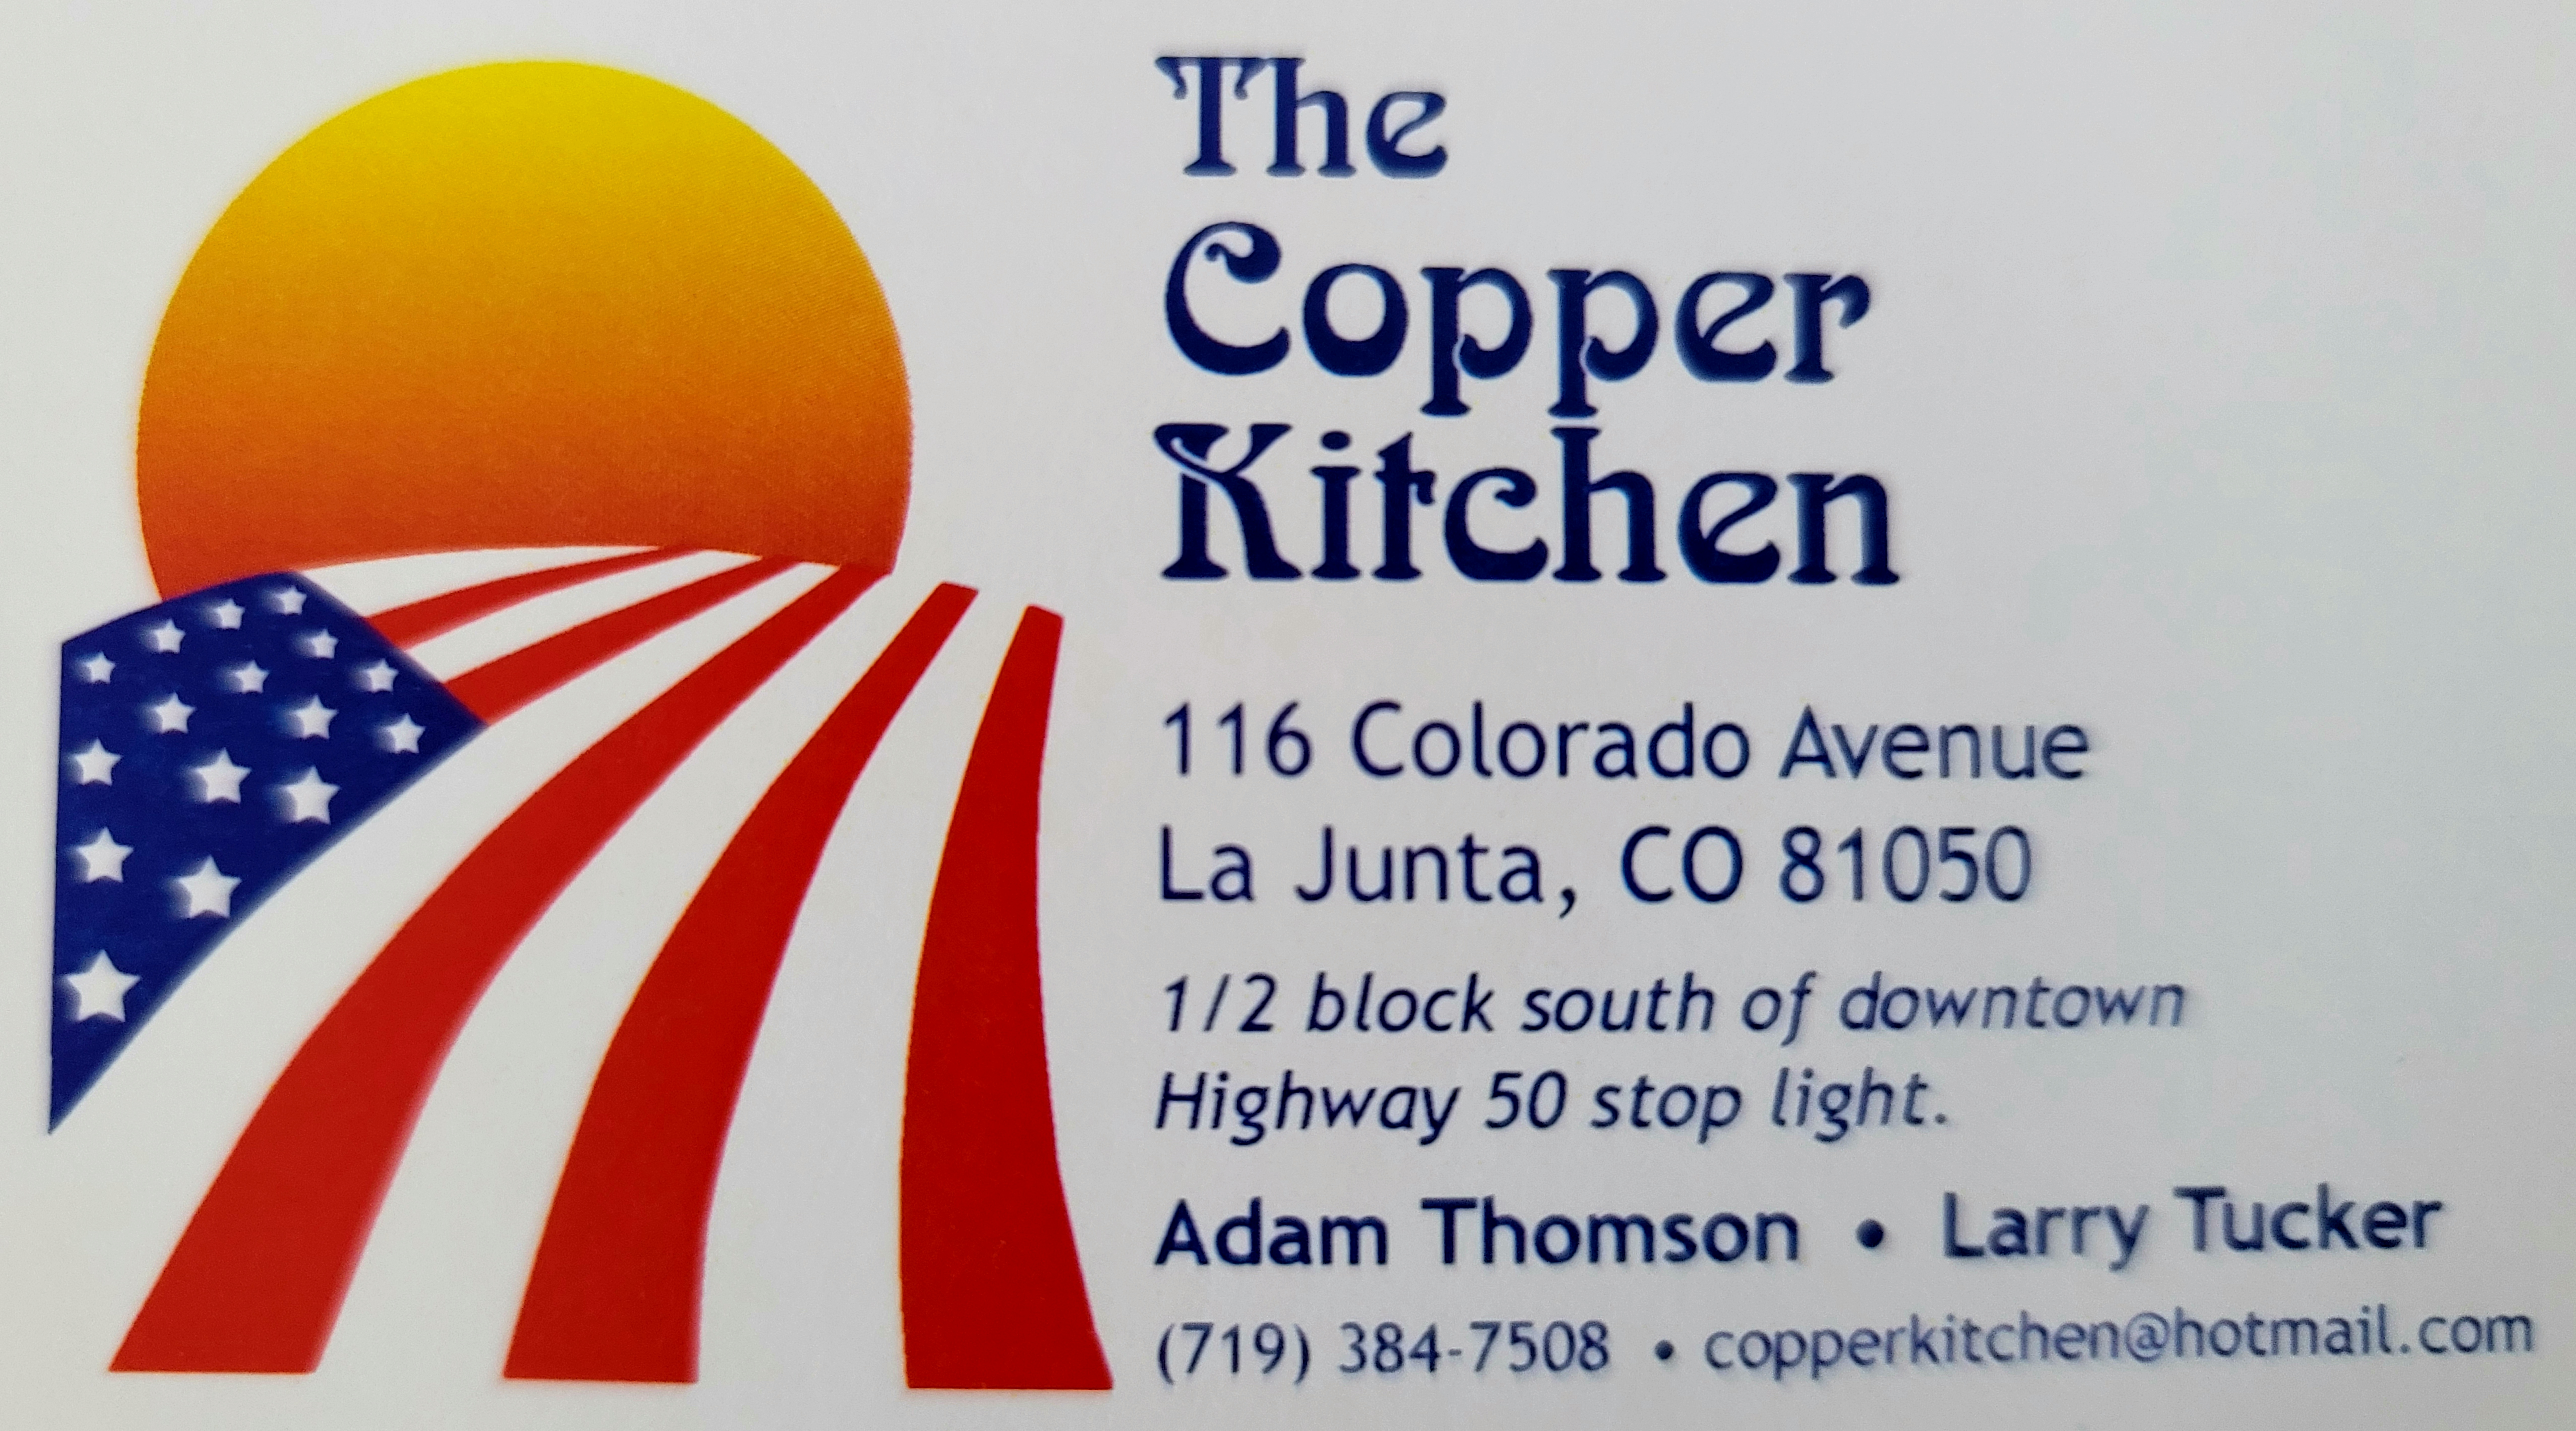 The Copper Kitchen SECO News seconews.org